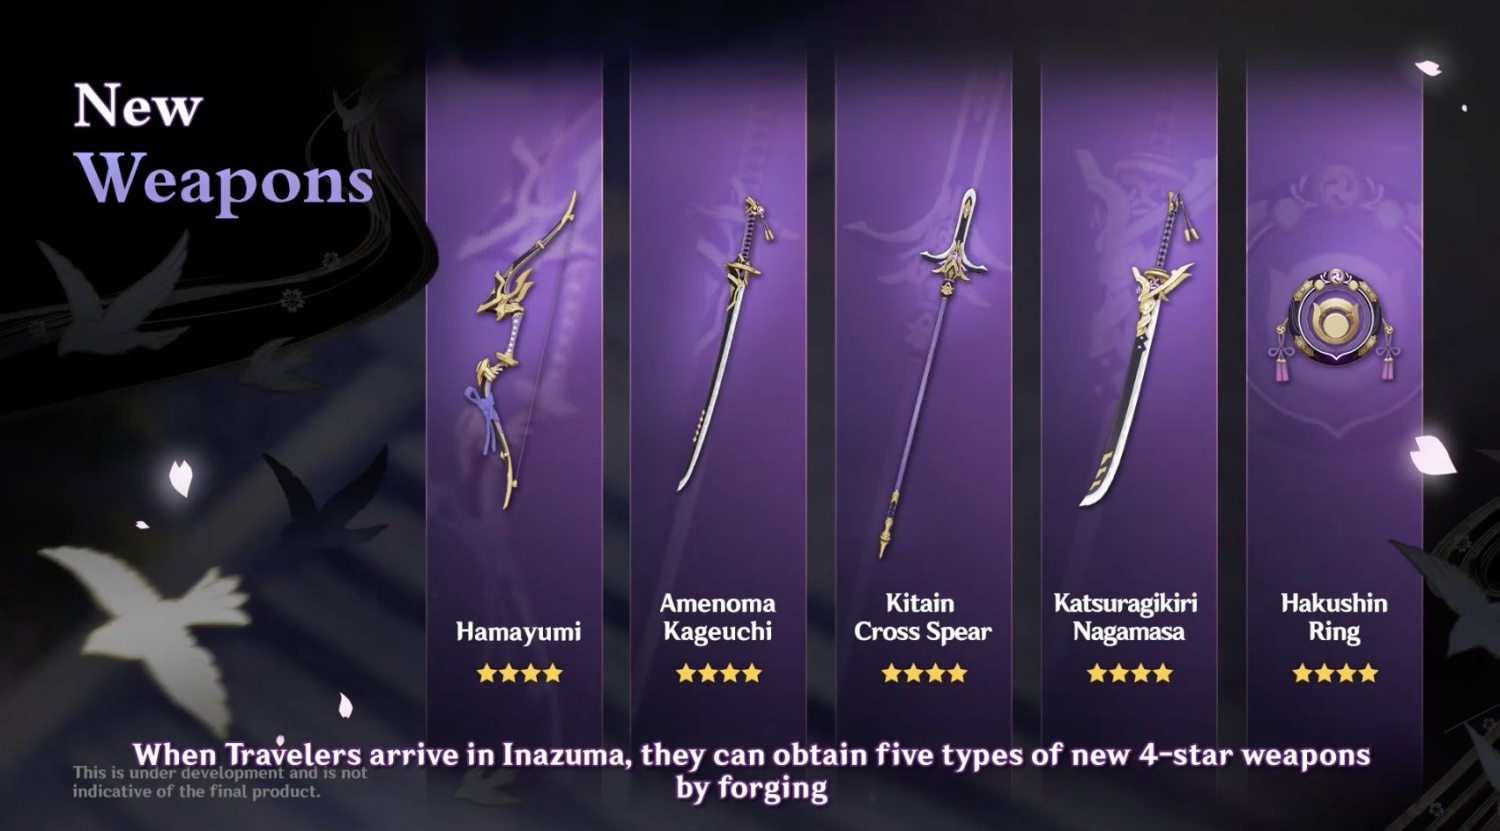 4-STAR WEAPONS